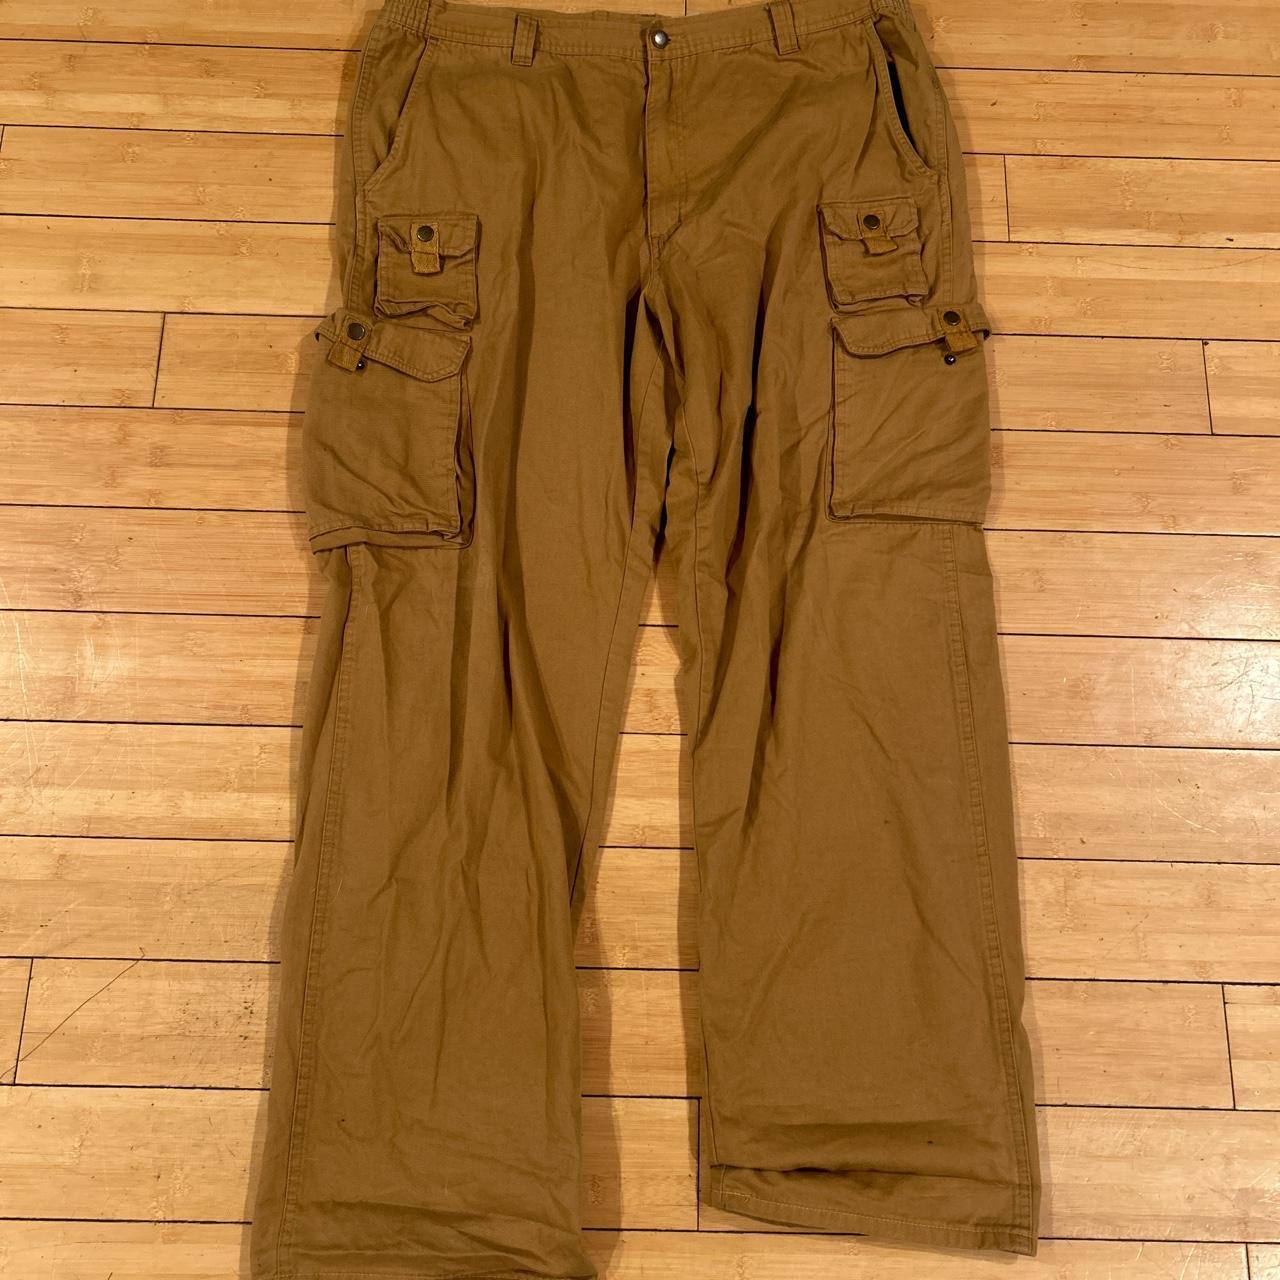 item listed by ilovecargopants